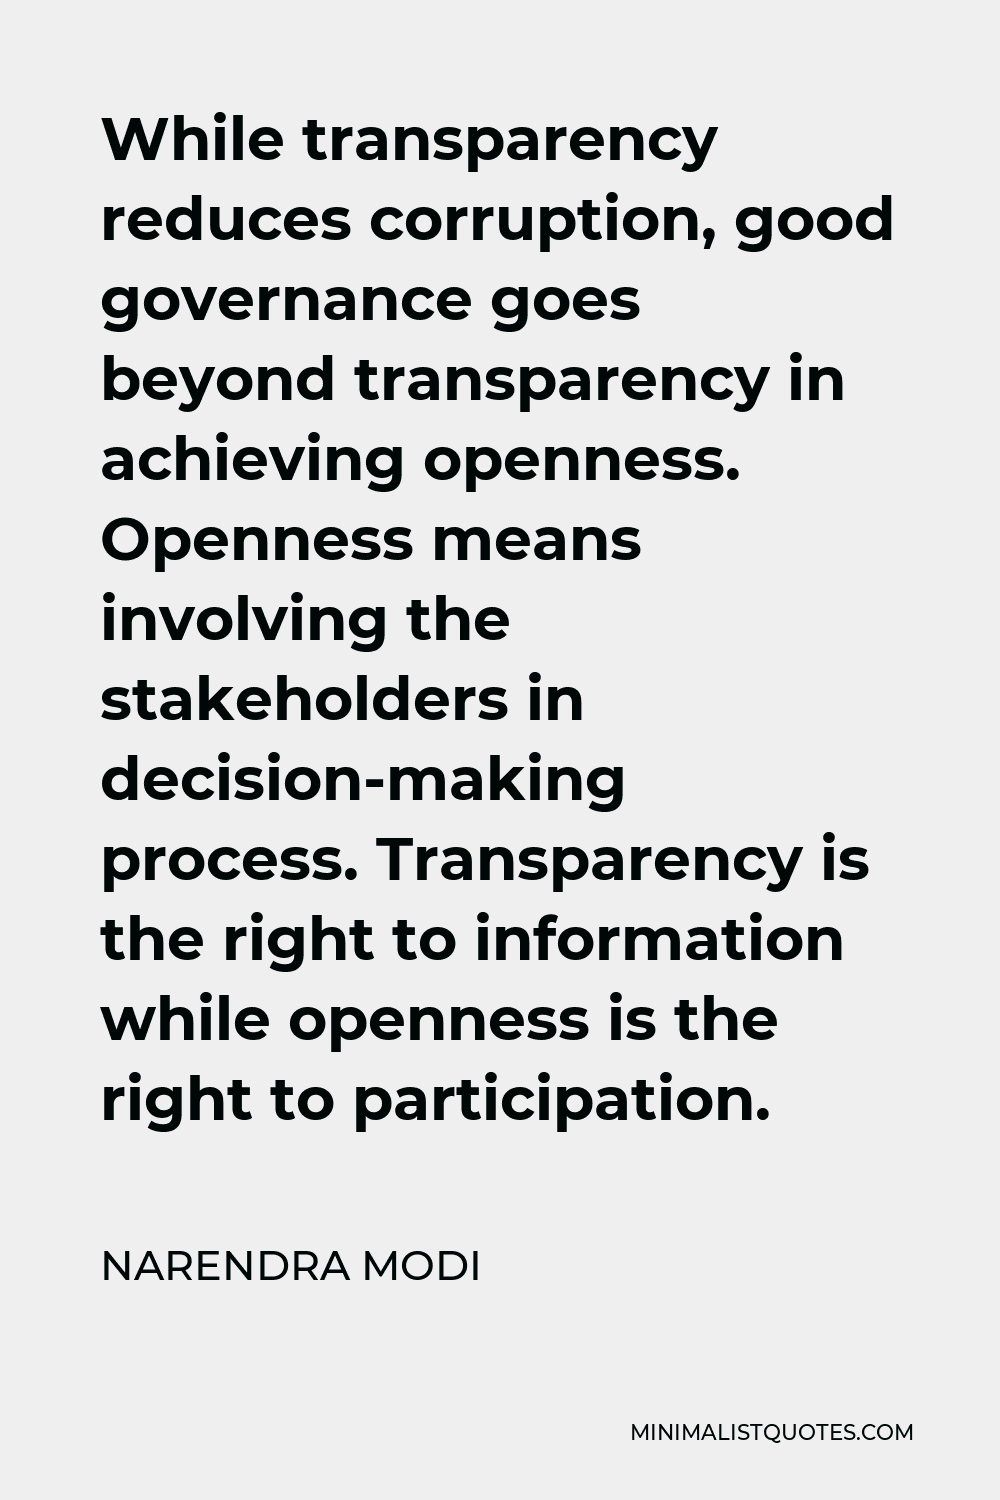 Narendra Modi Quote - While transparency reduces corruption, good governance goes beyond transparency in achieving openness. Openness means involving the stakeholders in decision-making process. Transparency is the right to information while openness is the right to participation.